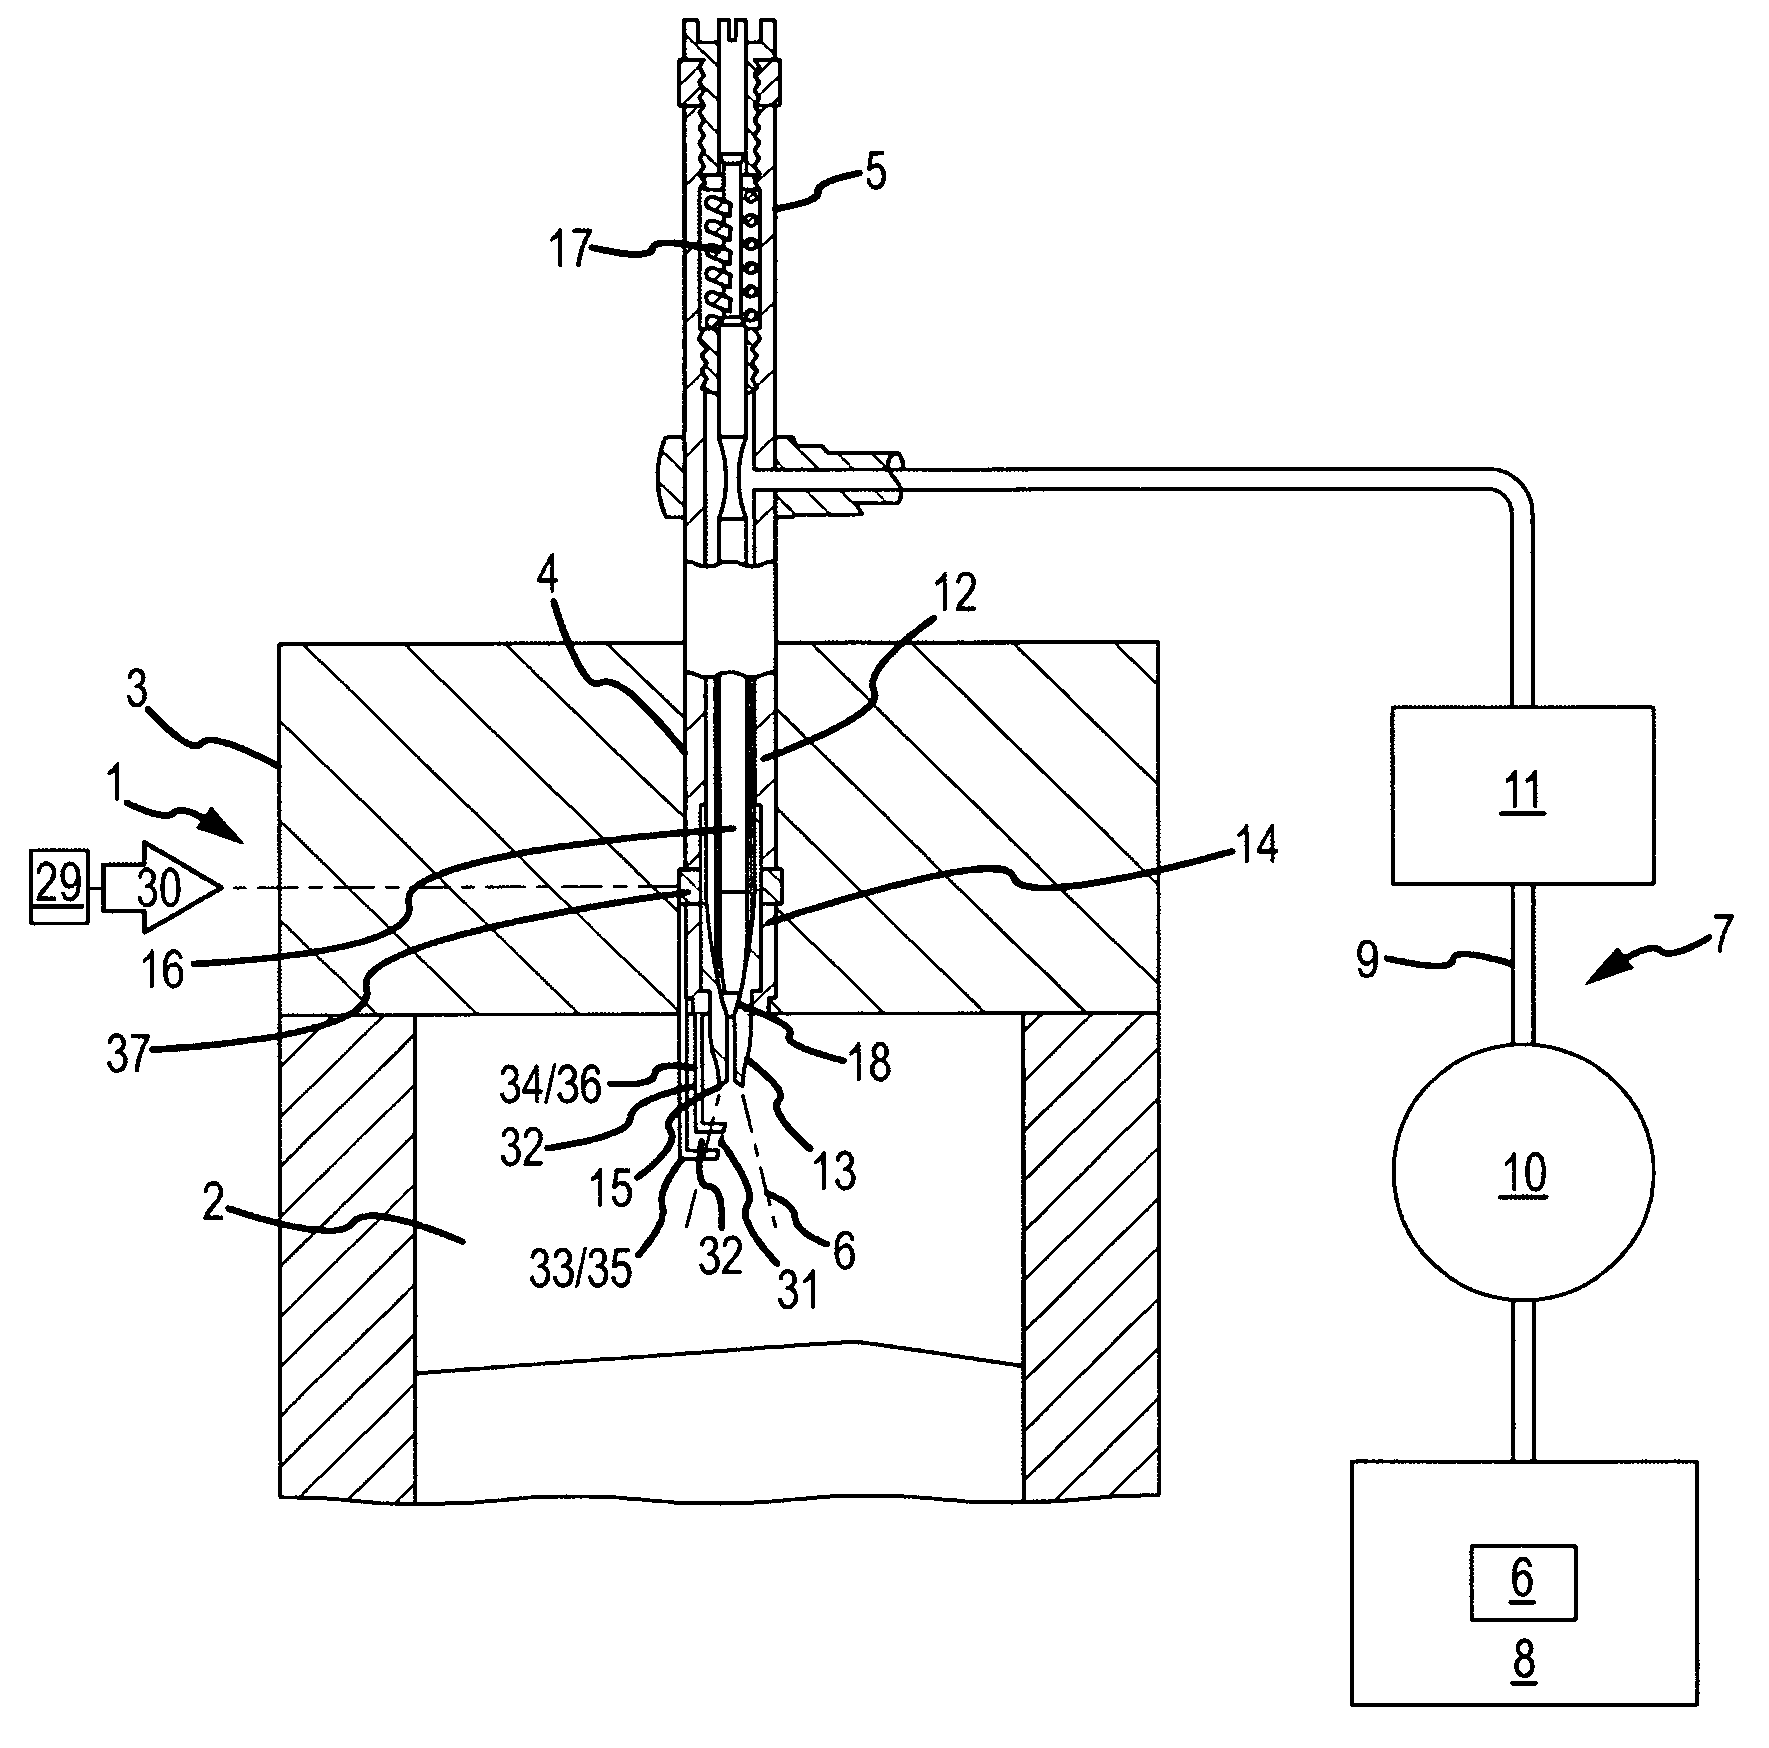 Fuel injection stream parallel opposed multiple electrode spark gap for fuel injector